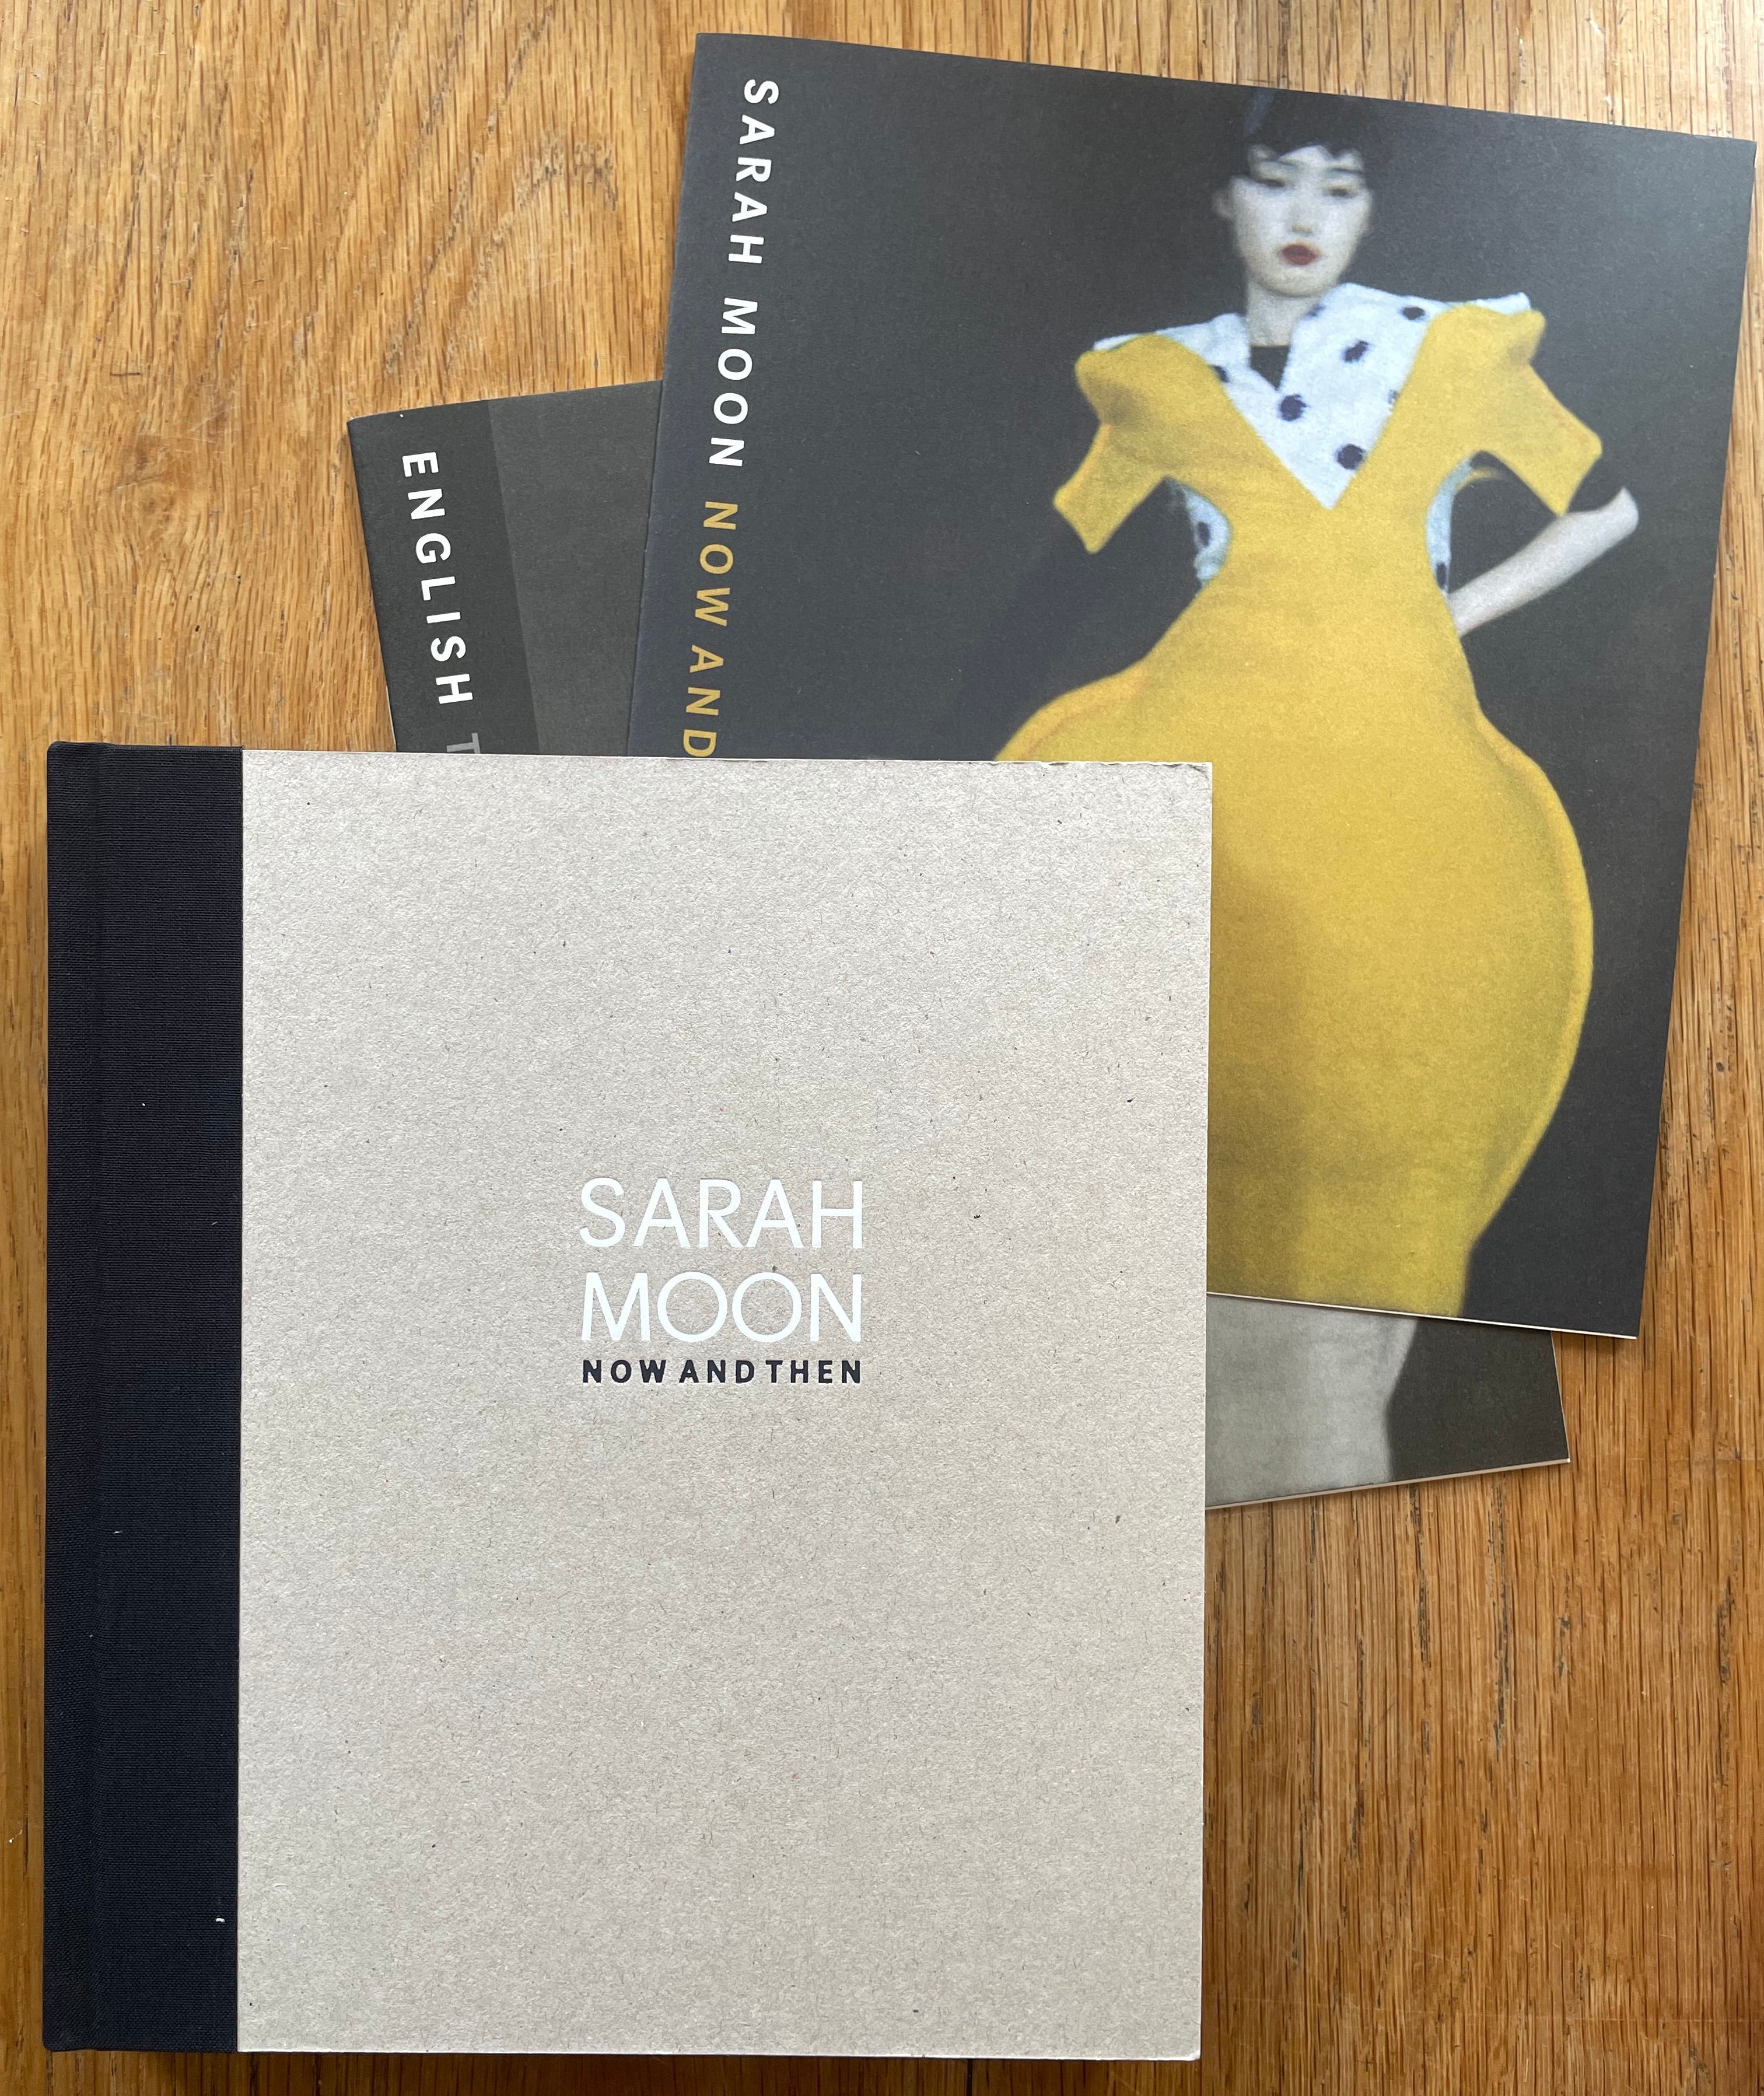 Buy Now and Then by Sarah Moon Photography book – Setanta Books